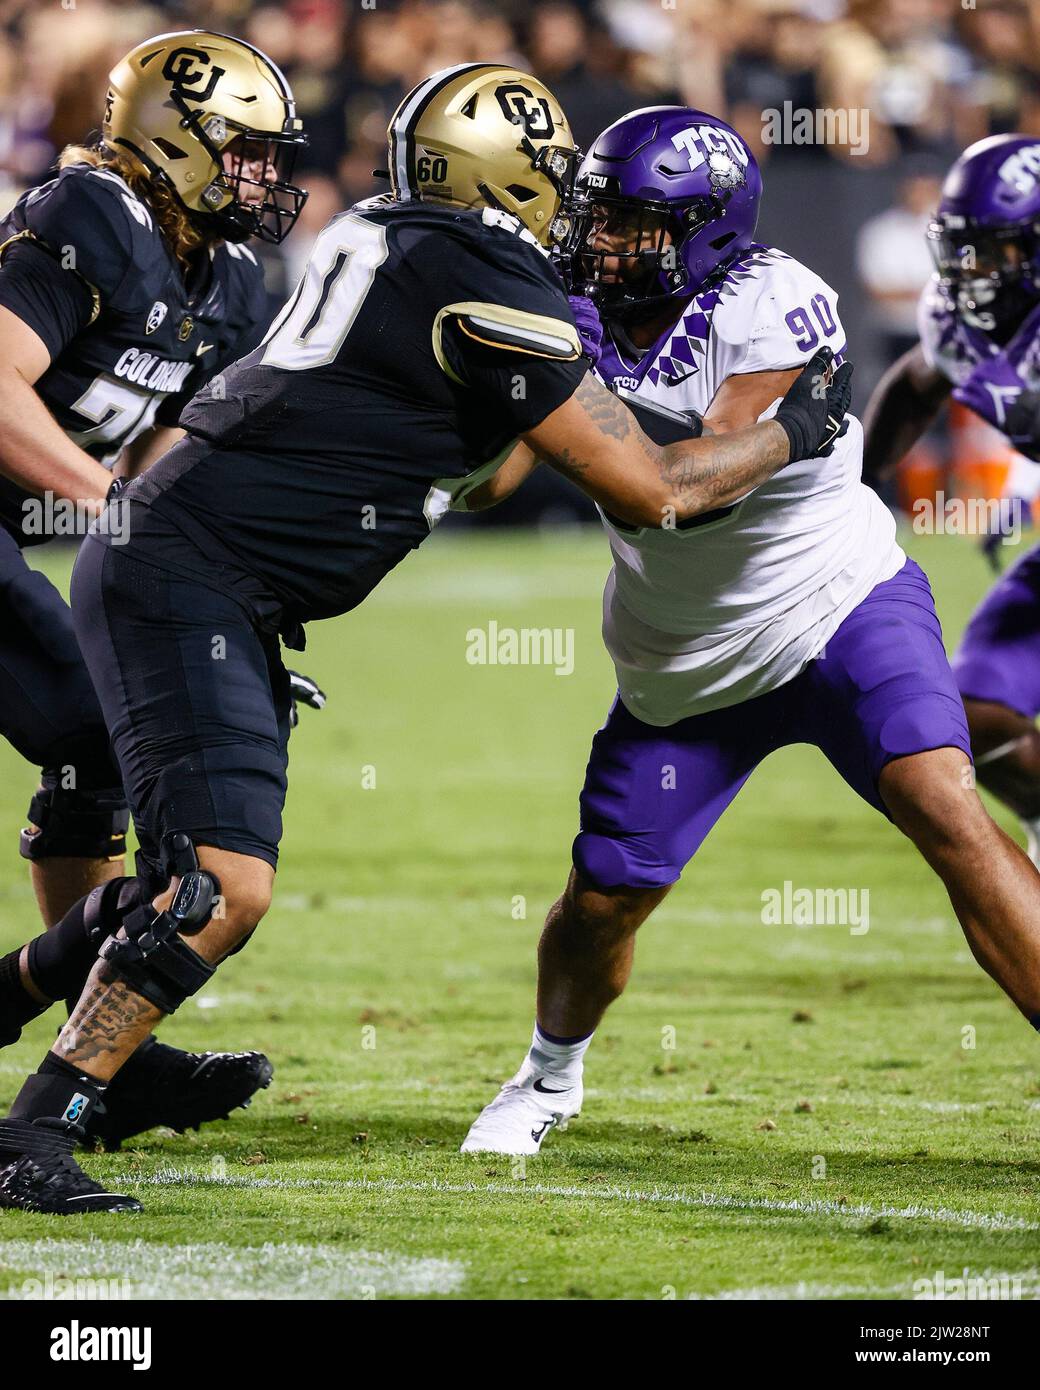 Boulder, CO, USA. 02nd Sep, 2022. Colorado Buffaloes offensive lineman Jake Wiley (60) and TCU Horned Frogs defensive lineman Caleb Fox (90) battle at the line in the first half of the football game between Colorado and TCU at Folsom Field in Boulder, CO. Derek Regensburger/CSM/Alamy Live News Stock Photo